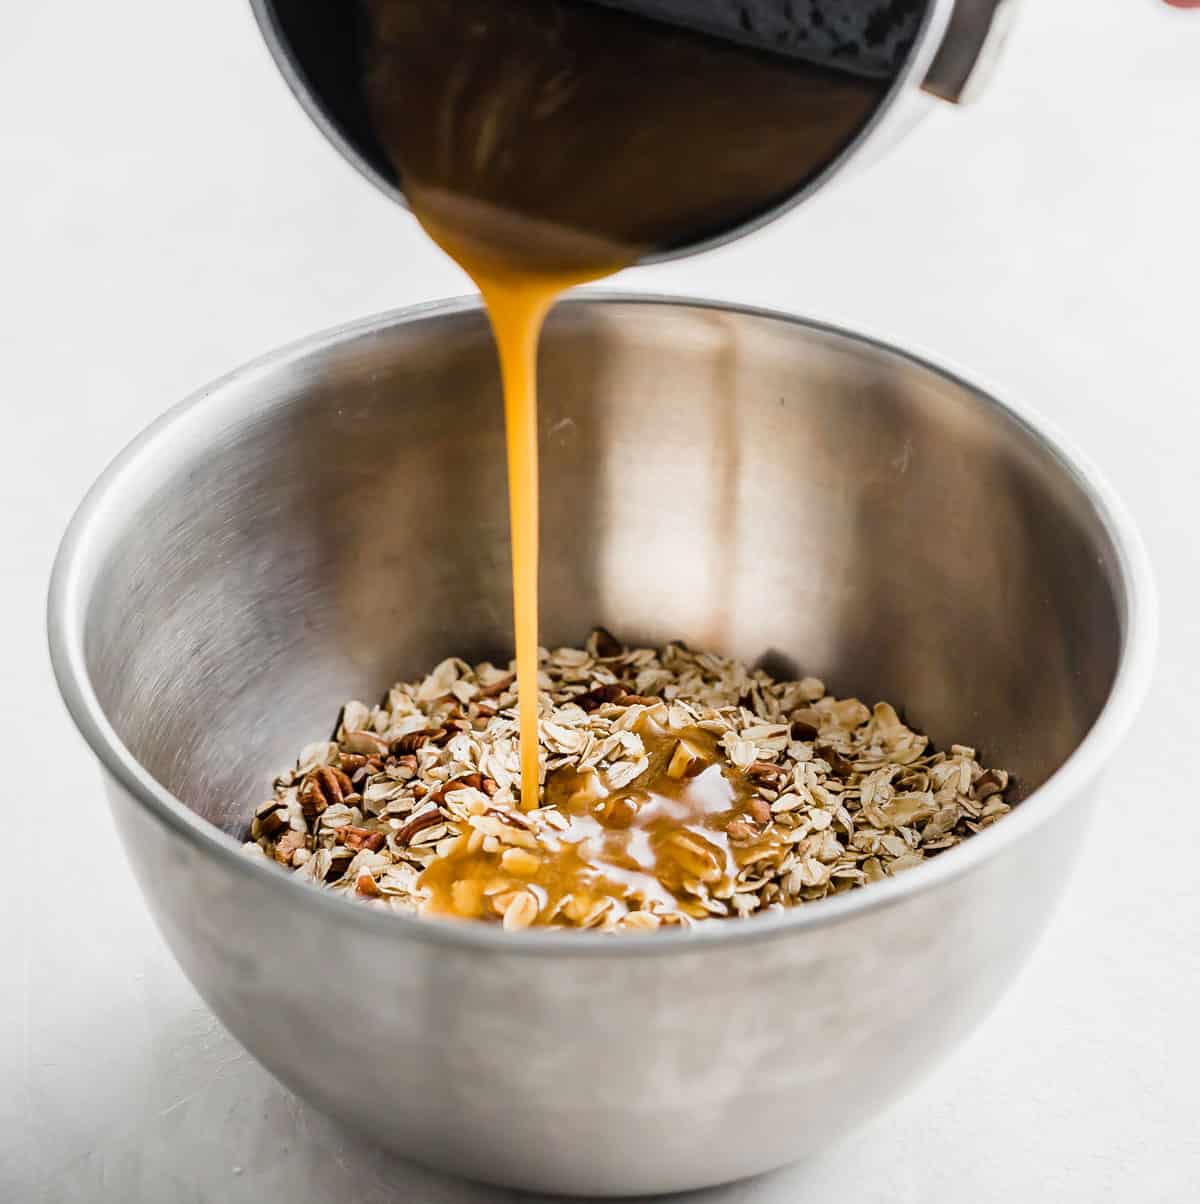 A brown liquid being poured from a small pot into a metal bowl filled with Oatmeal Raisin Granola Bar mixture.